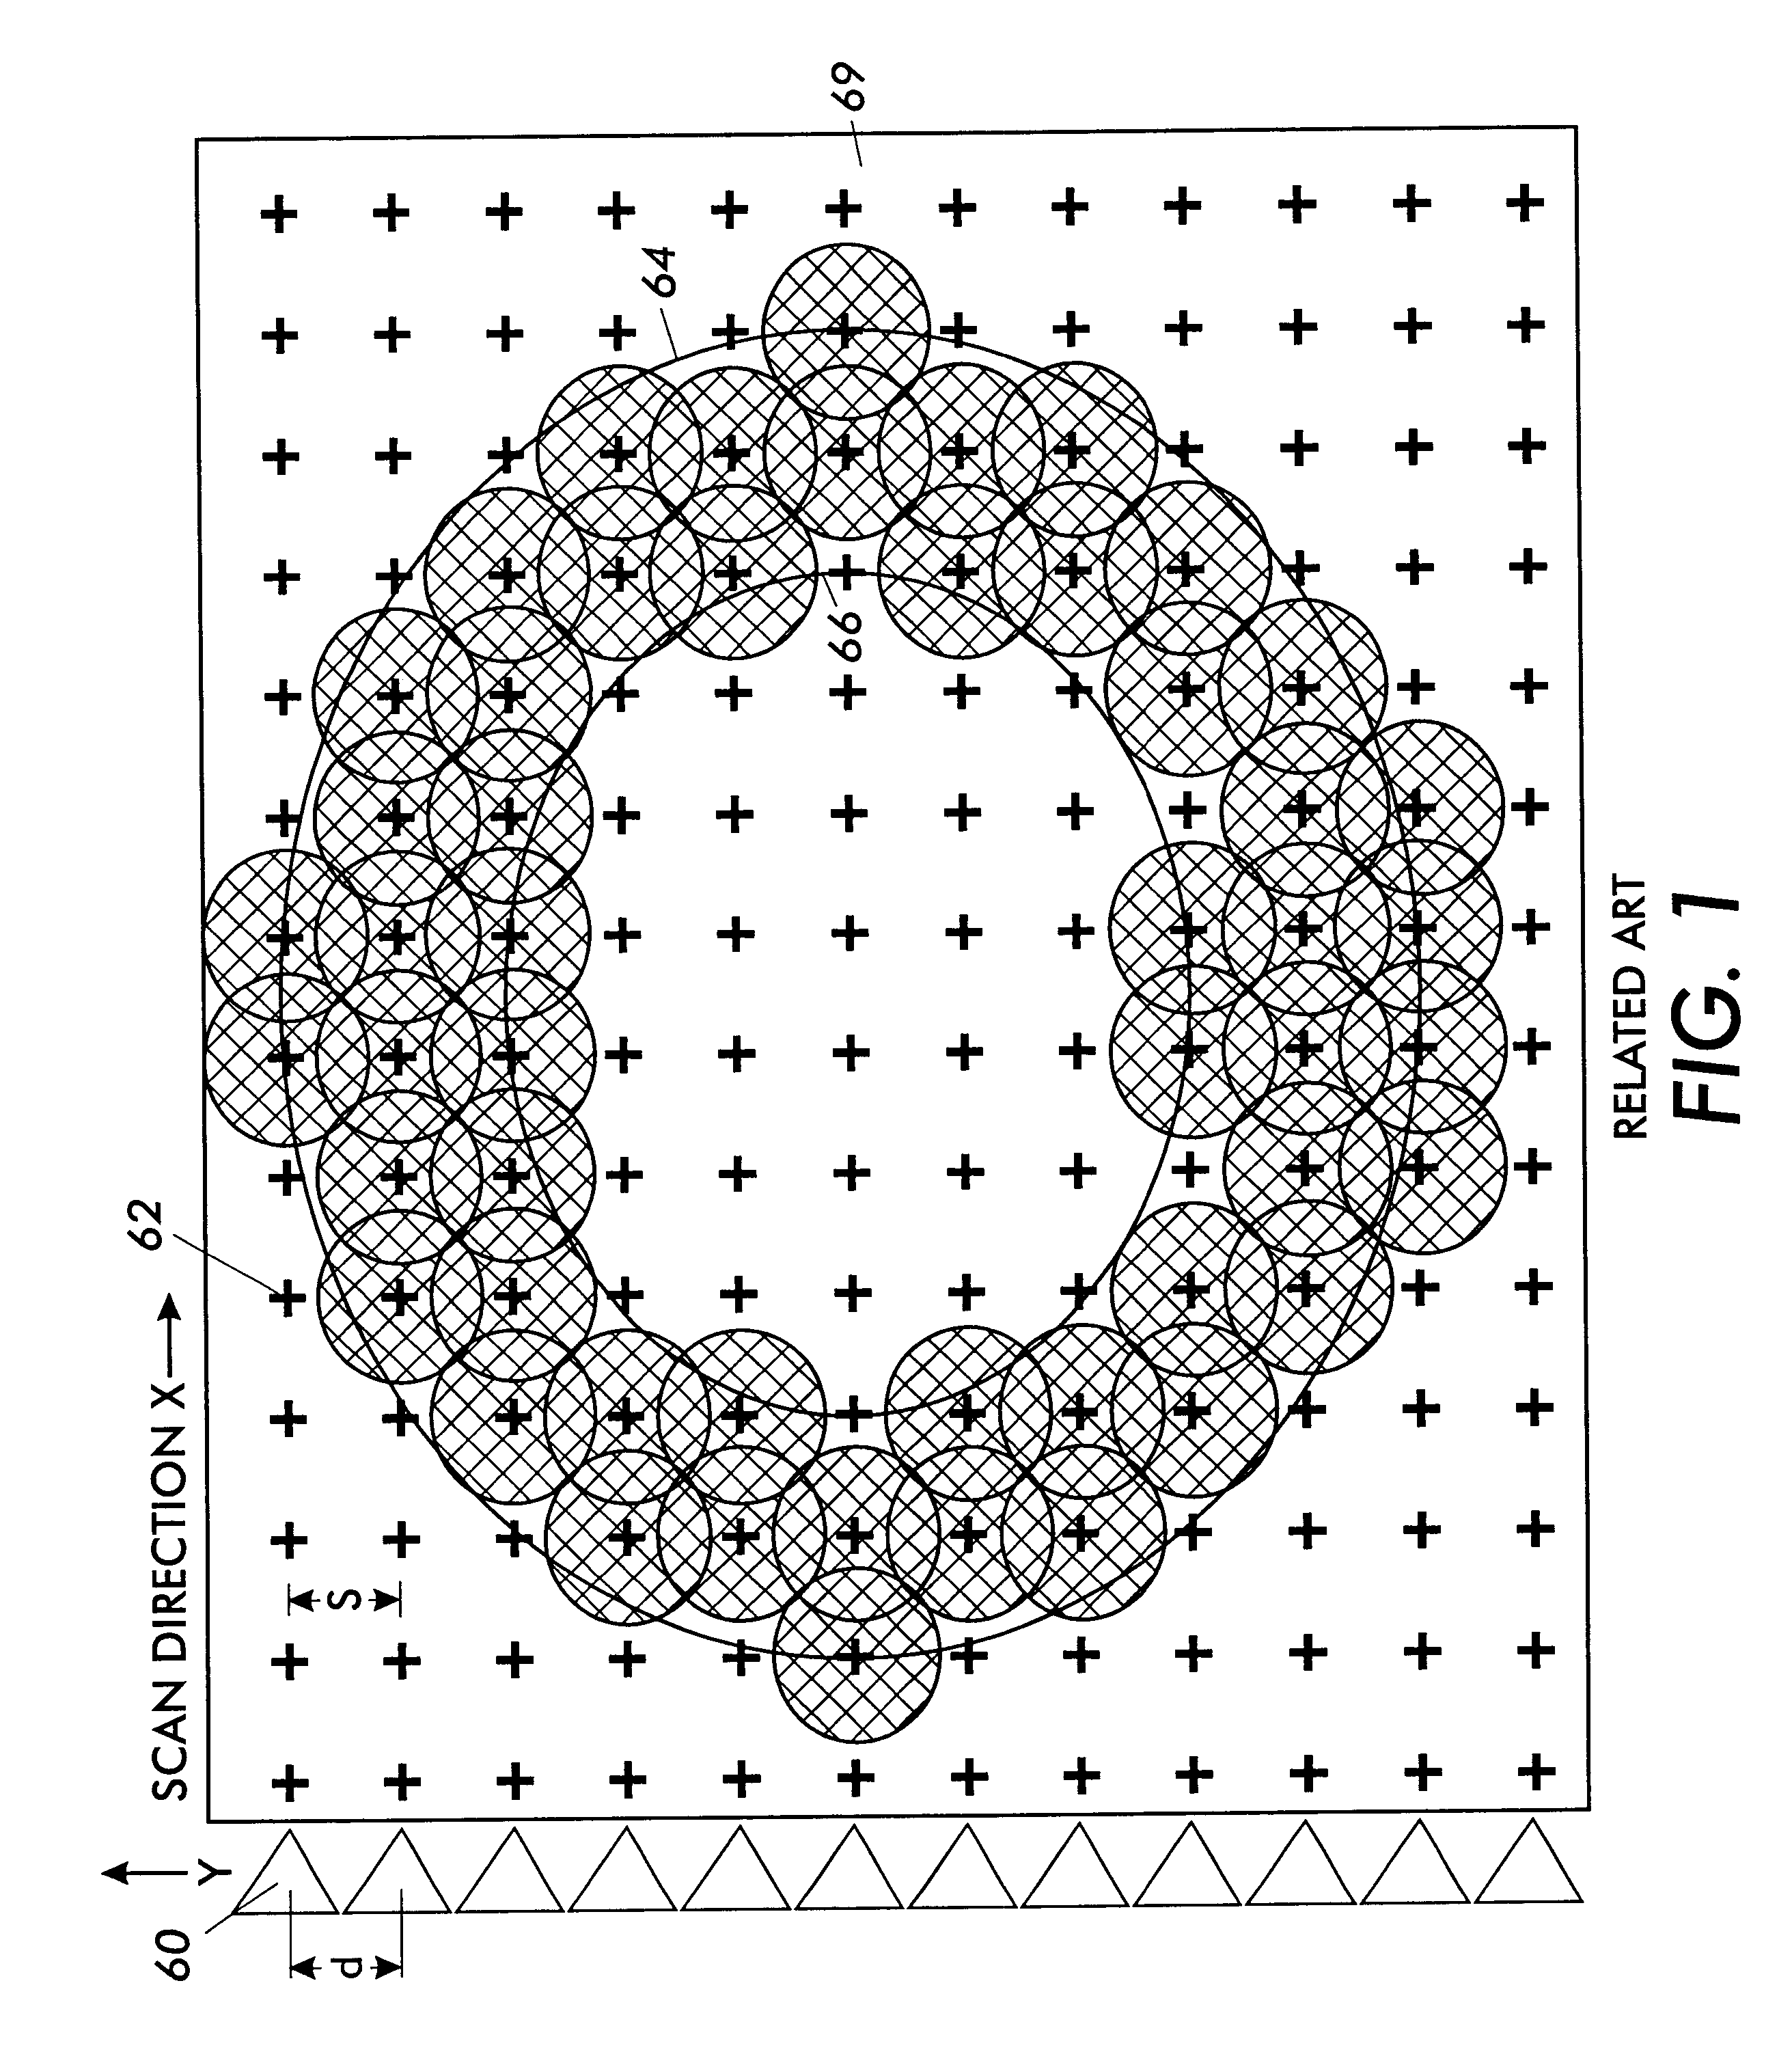 Gray scale fluid ejection system with offset grid patterns of different size spots